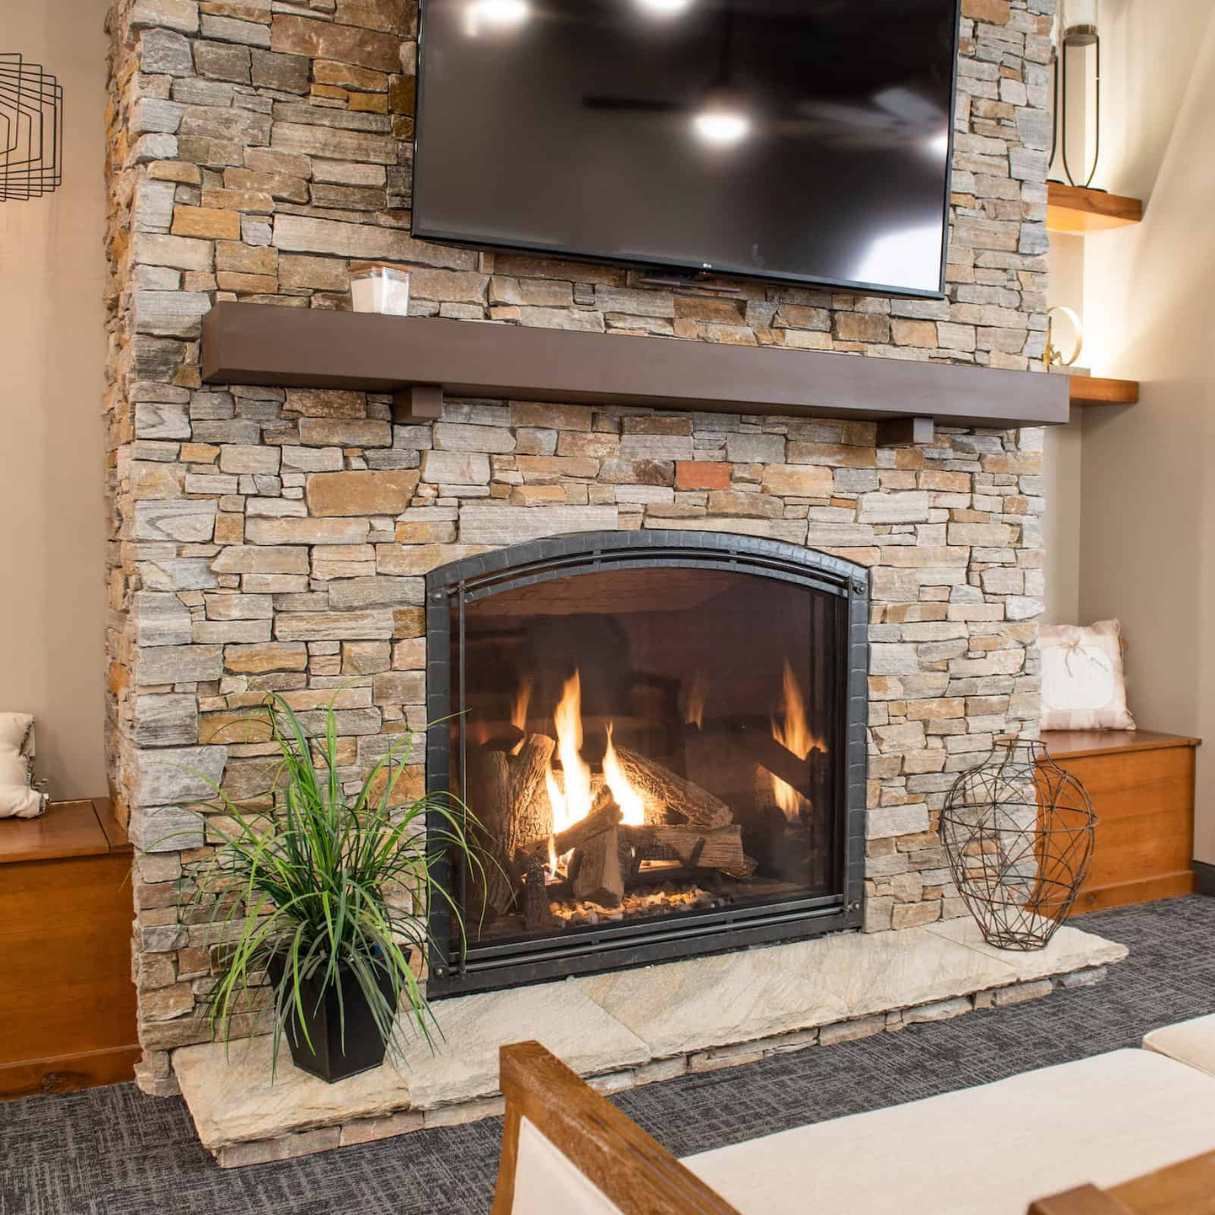 How To Clean Brick In A Fireplace